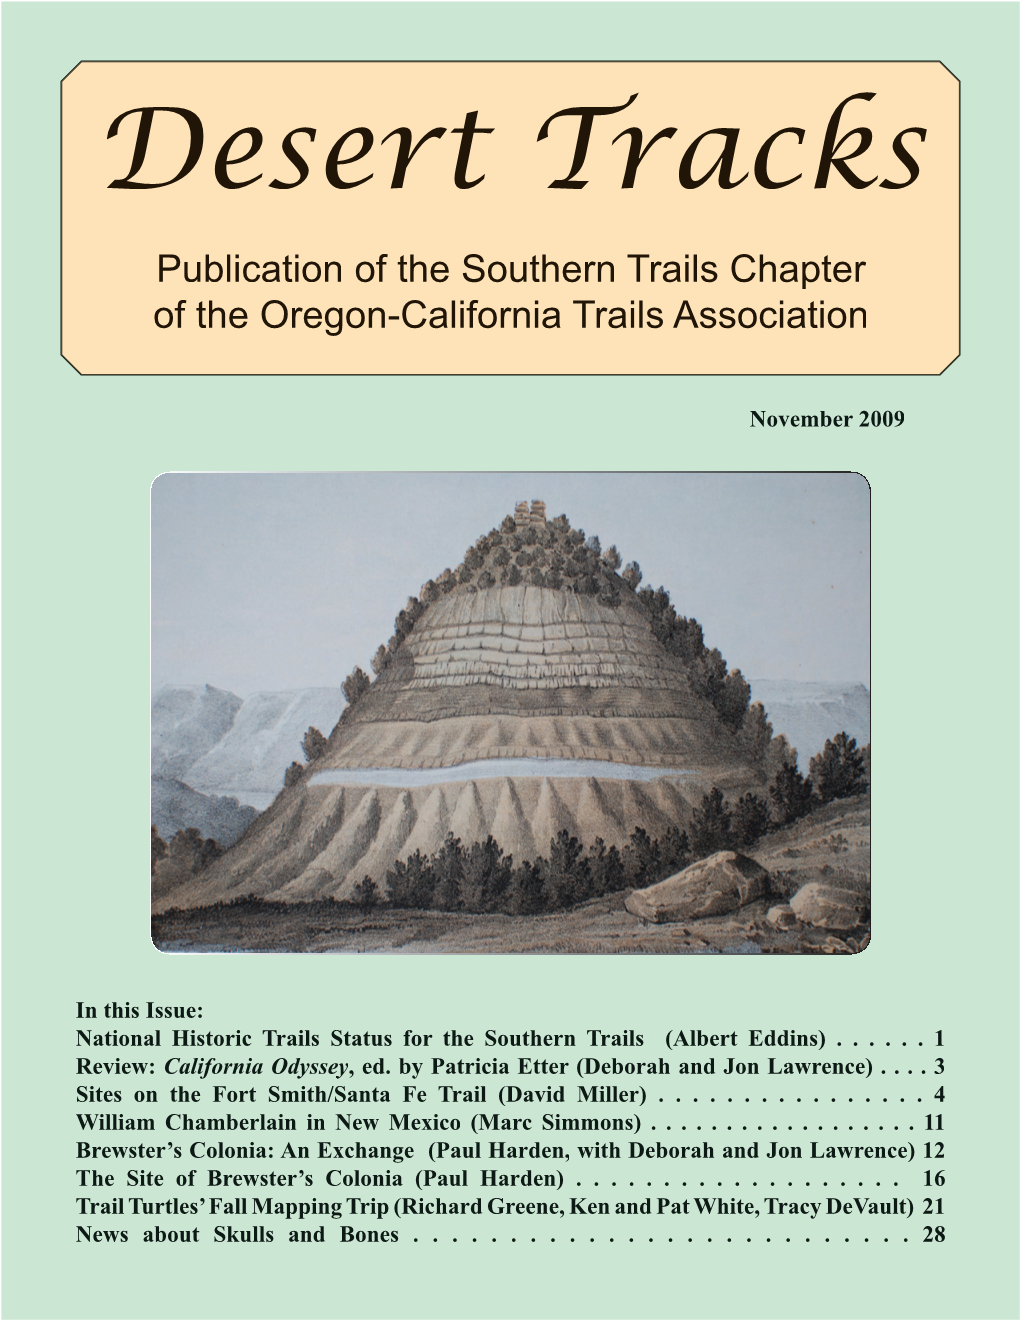 Desert Tracks Publication of the Southern Trails Chapter of the Oregon-California Trails Association